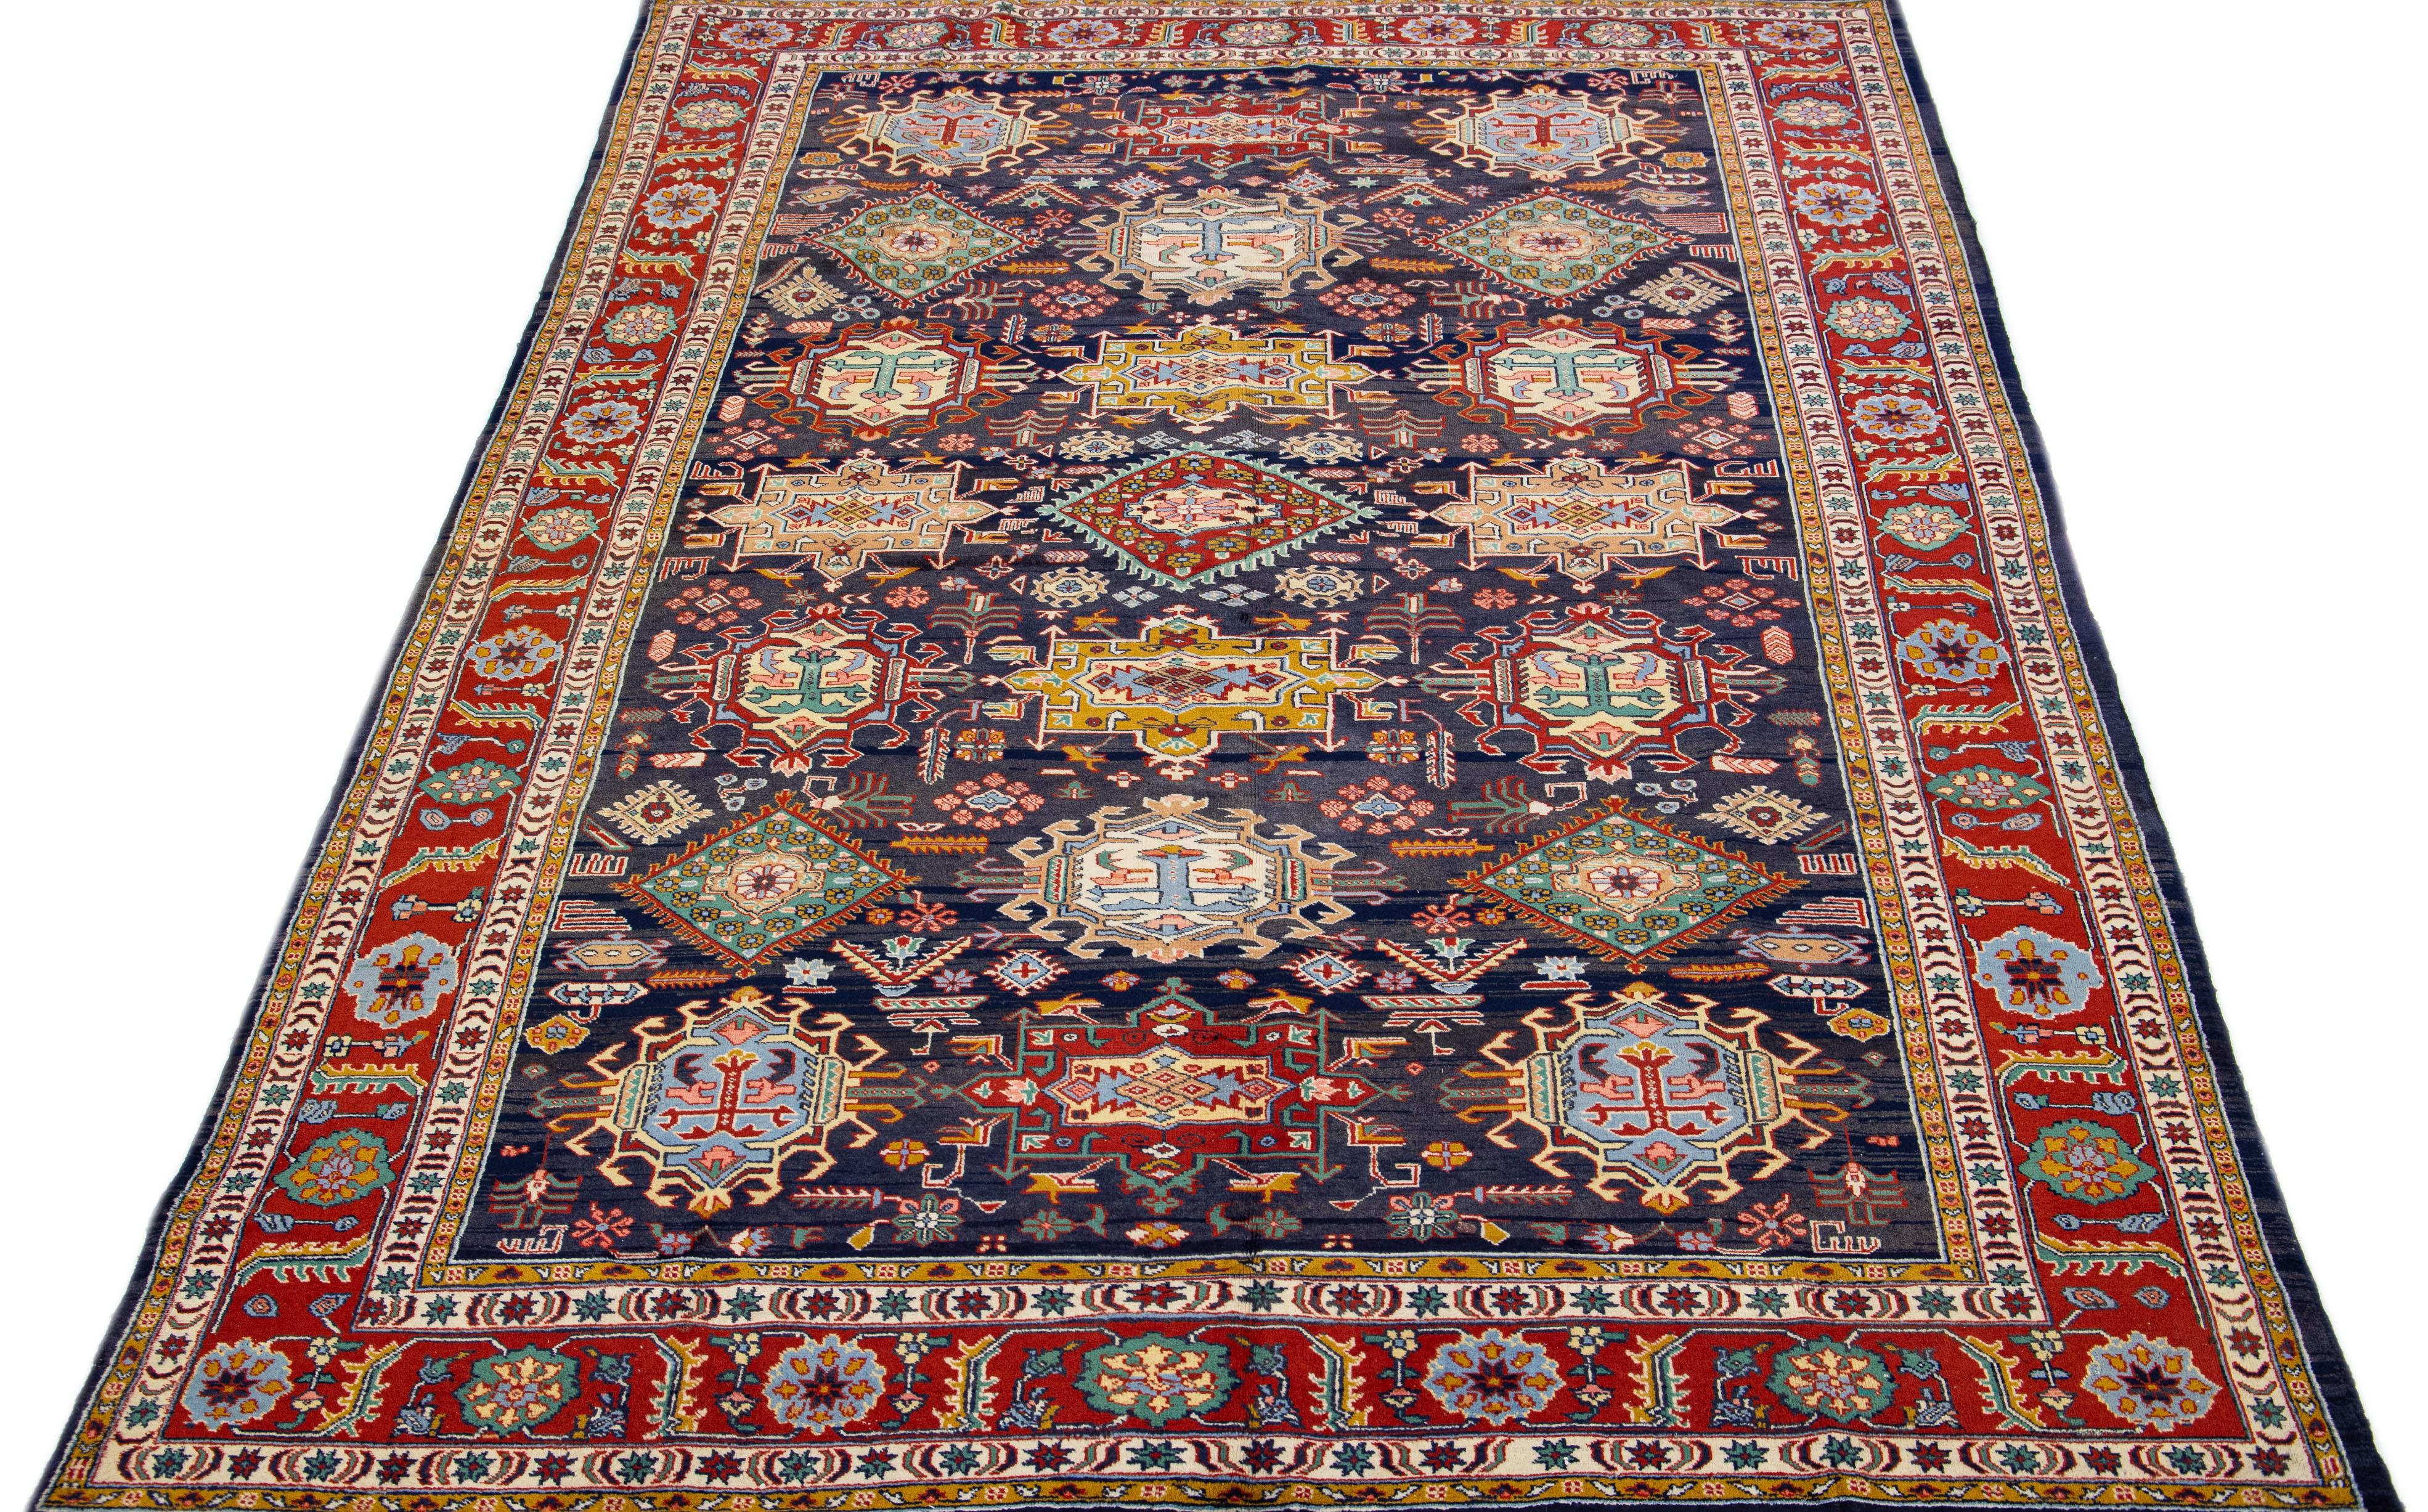 Beautiful vintage Heriz hand knotted wool rug with a blue field. This Persian rug has multi-color accents and a gorgeous all-over geometric floral medallion design.

This rug measures 6'11